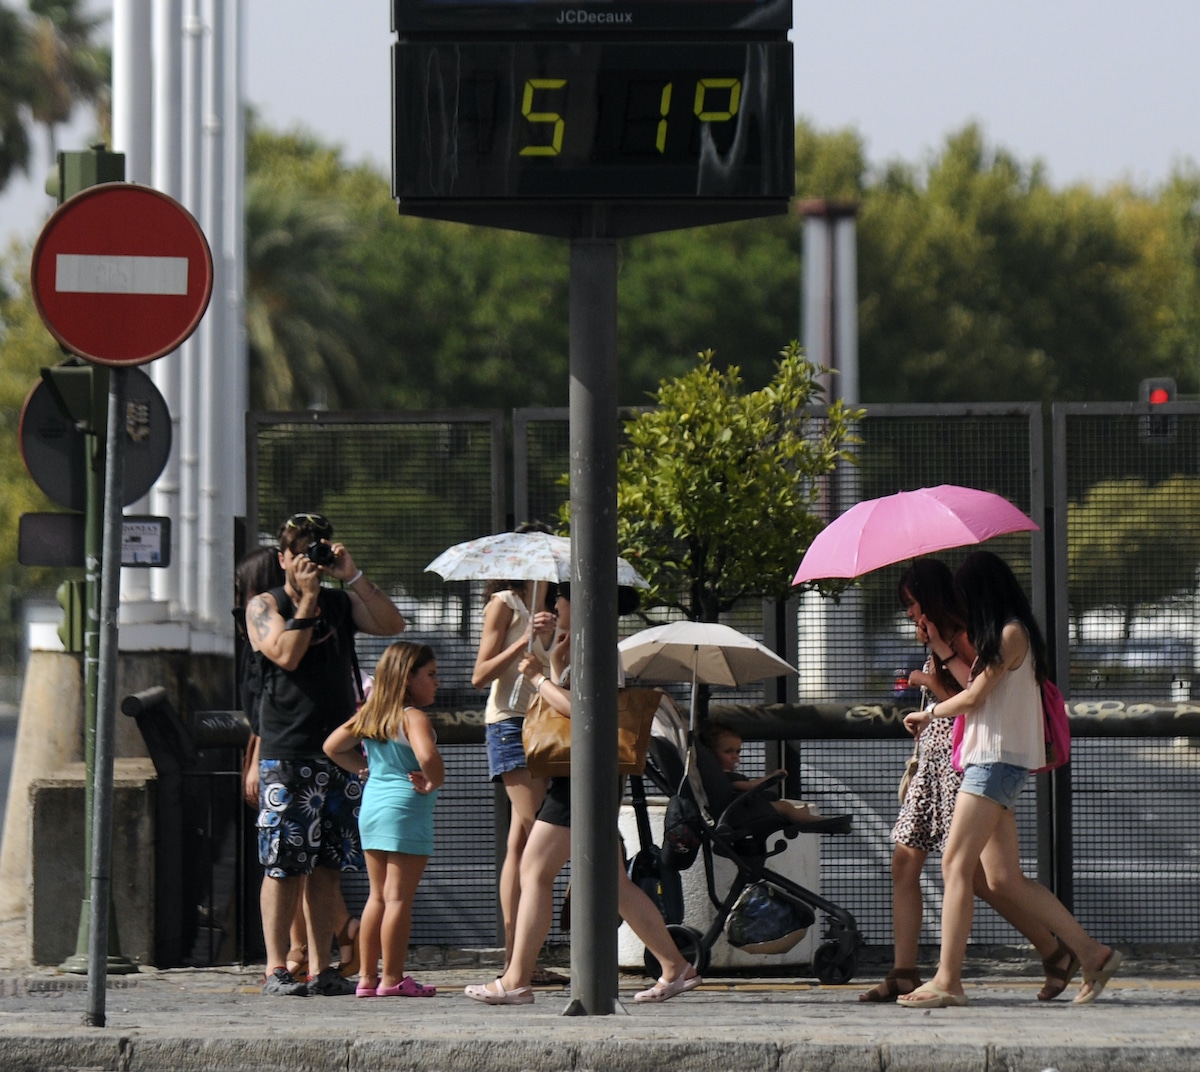 Seville, Spain to Be World’s First City to Name and Rank Heat Waves